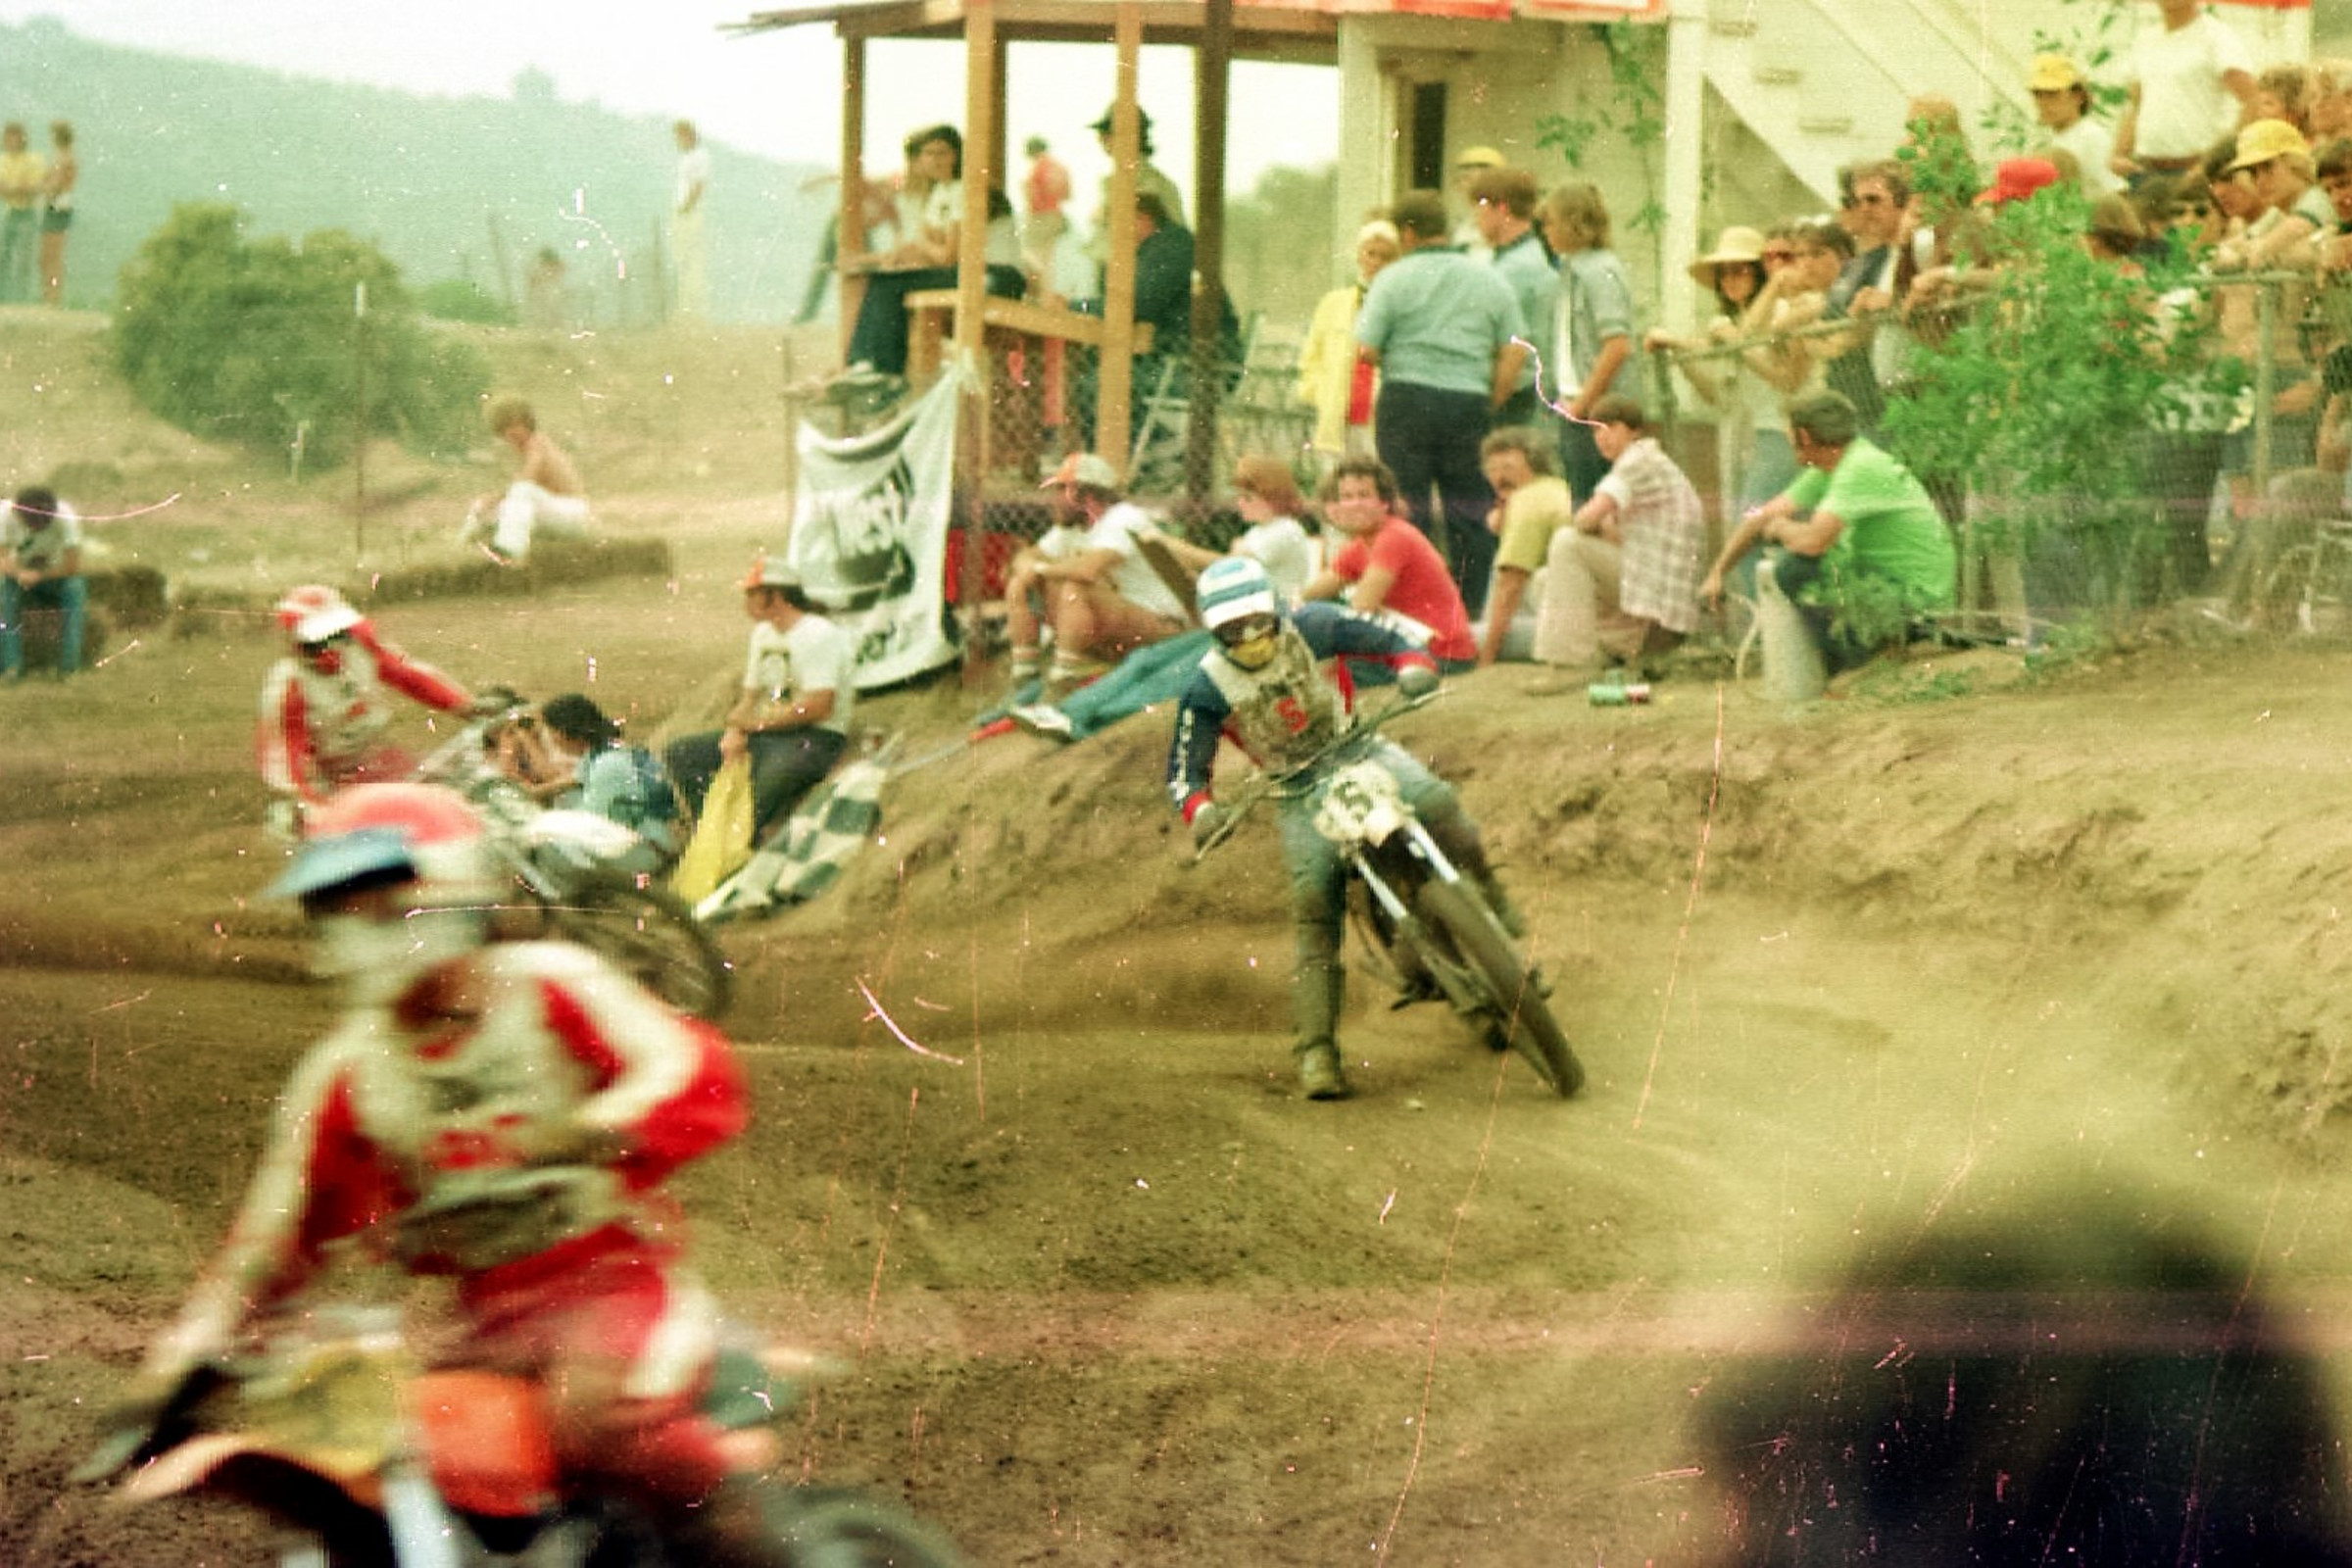 AMA Amateur/Minicycle Nationals Results Before Loretta Lynns (1973-1981) image pic